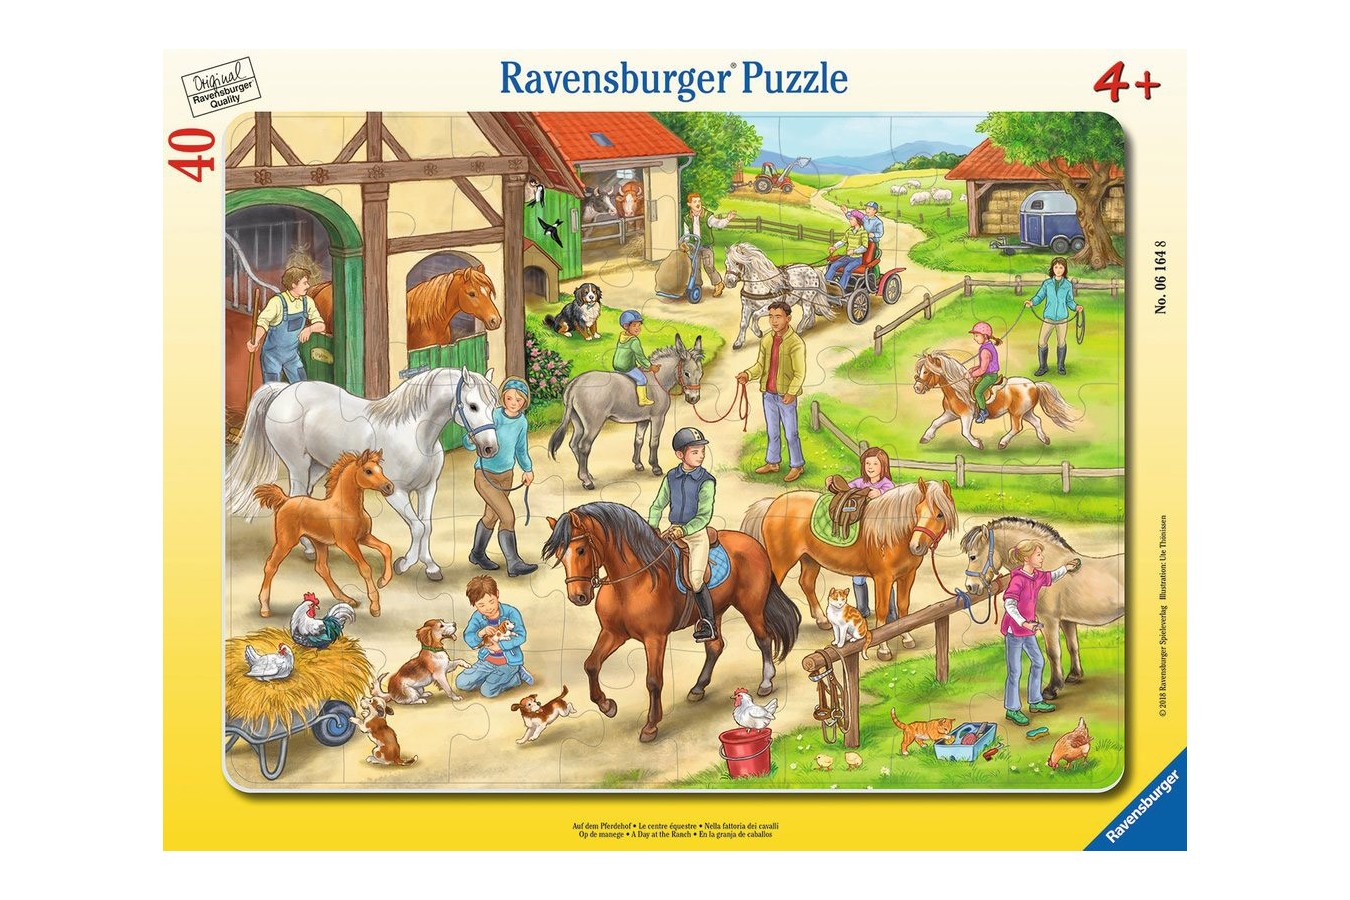 Puzzle Ravensburger - On the Horse Farm, 40 piese (06164)